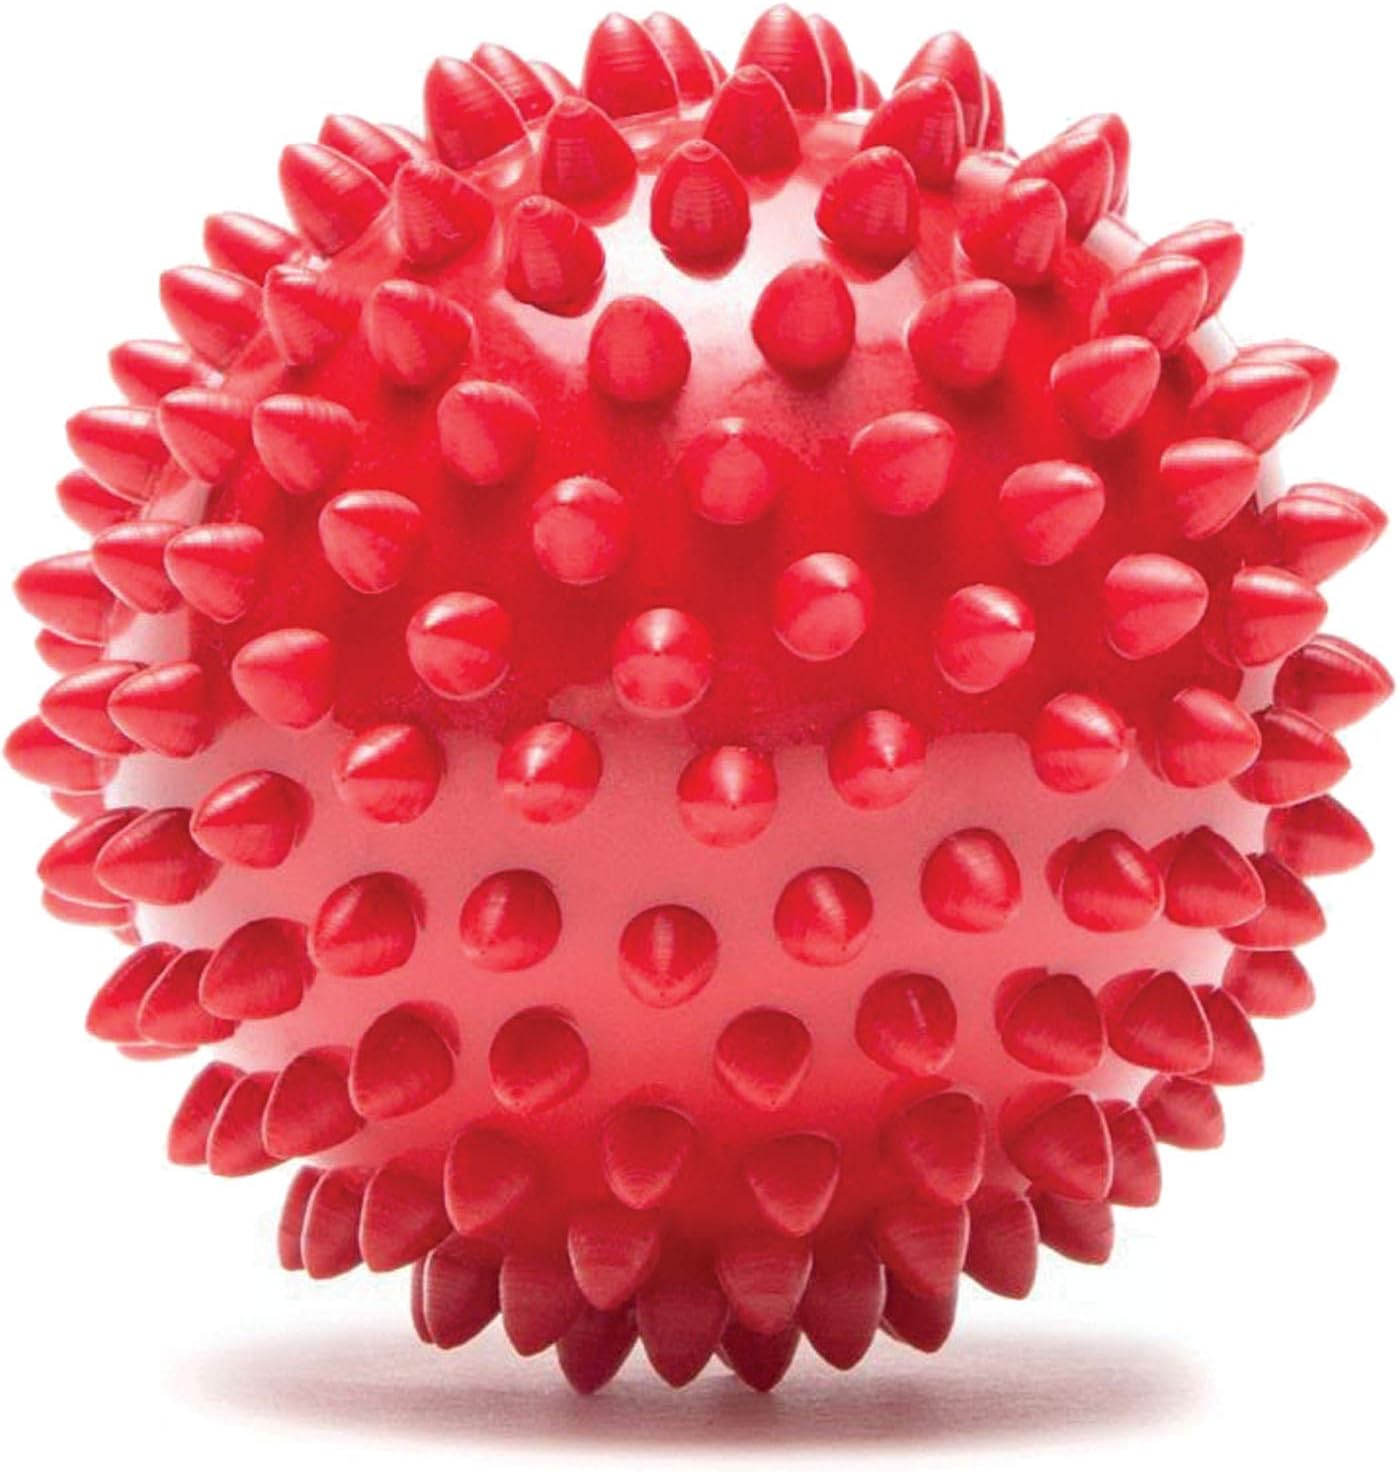 Spikey Ball from Amazon